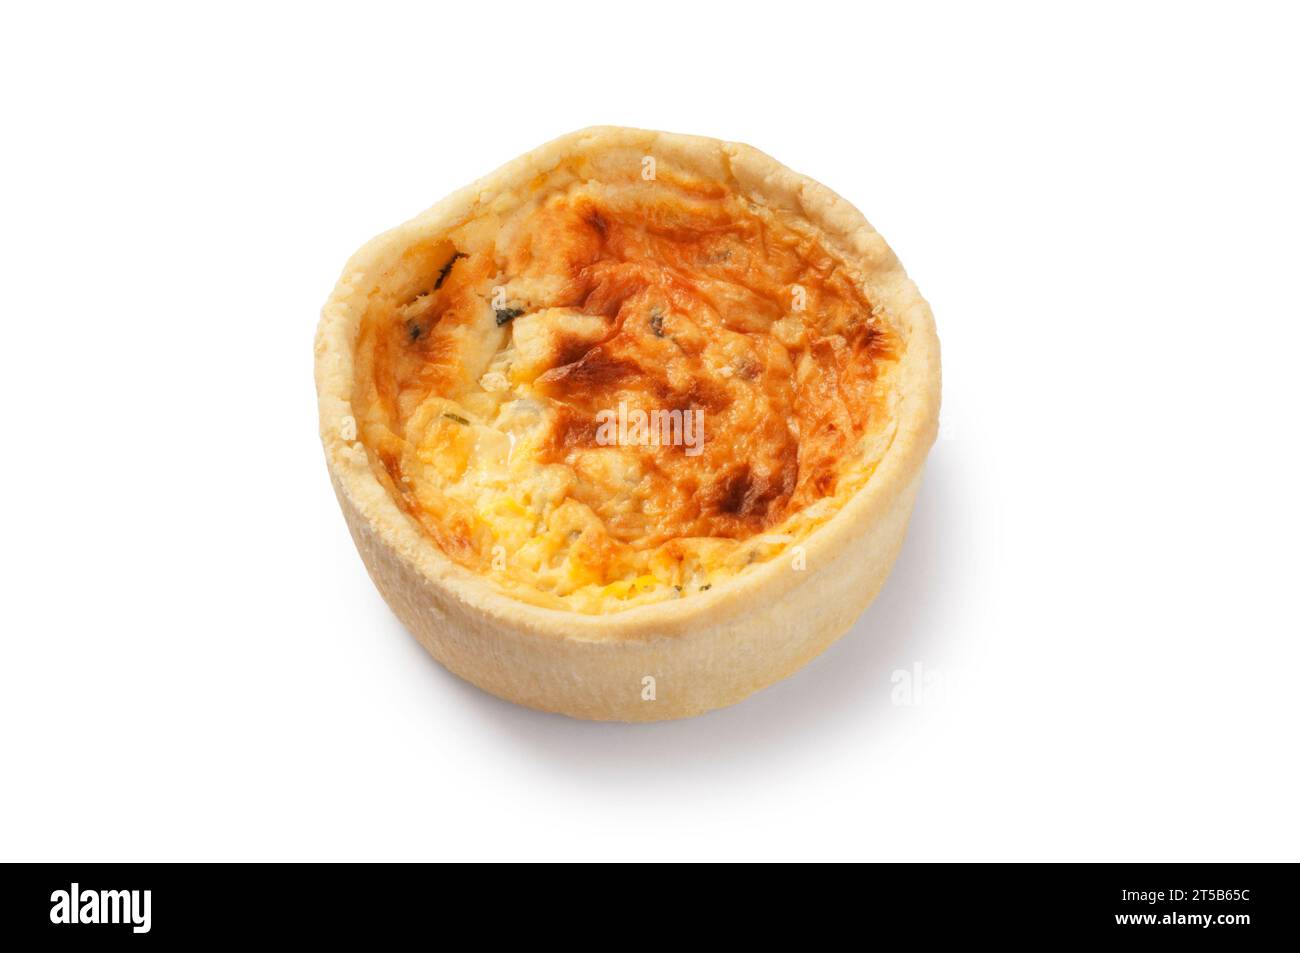 Studio shot of a small individual cheese and onion quiche cut out against a white background - John Gollop Stock Photo